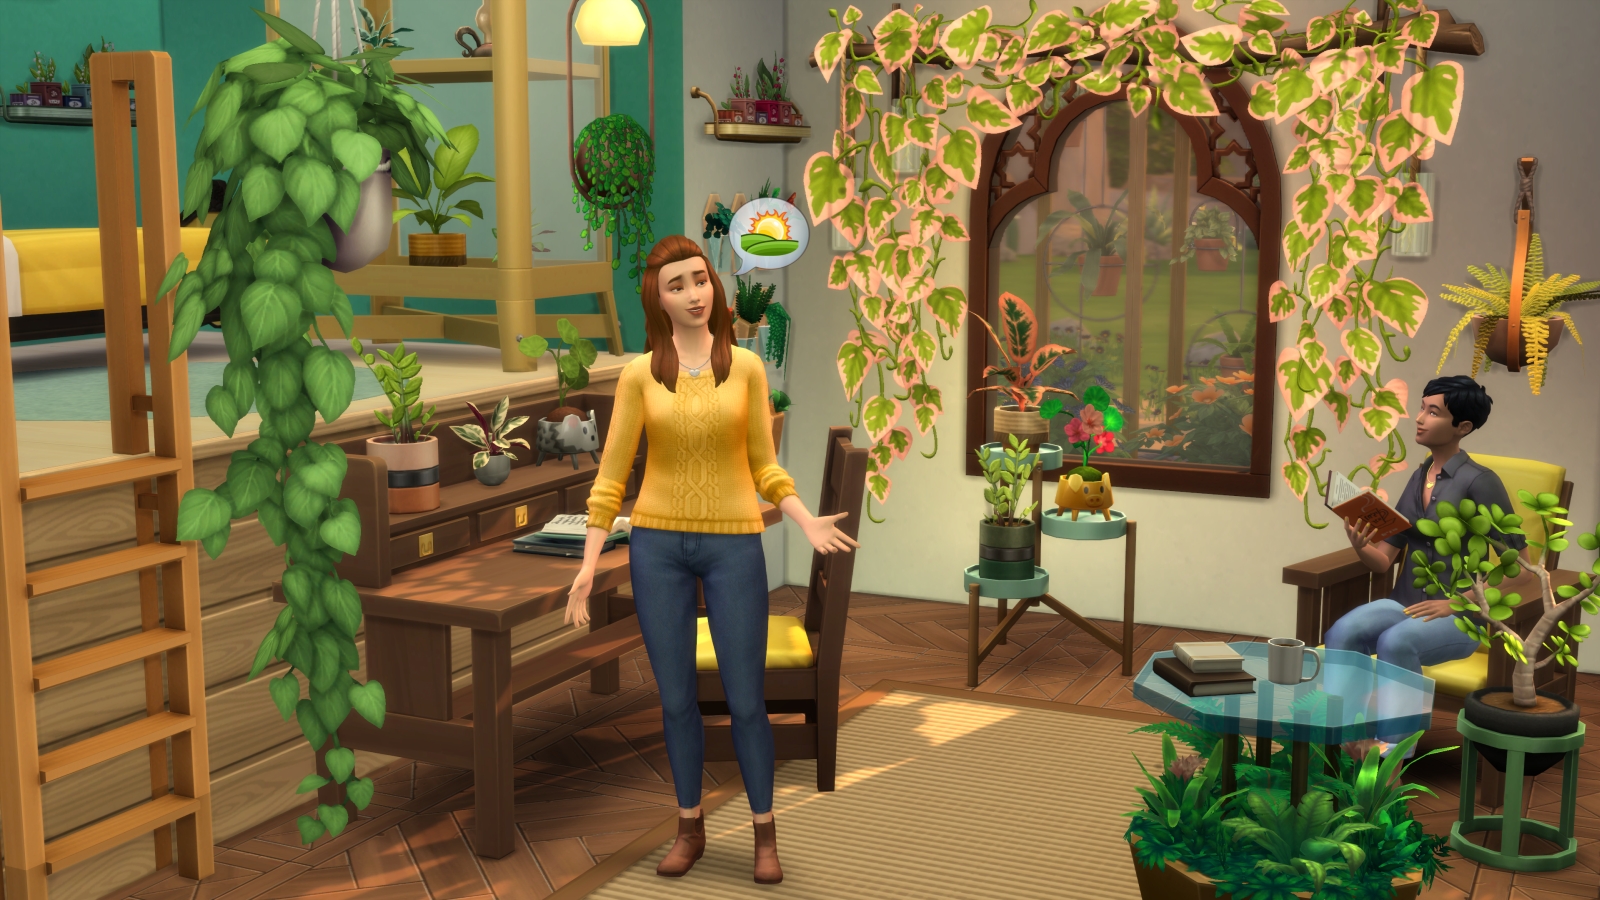 Review: Sims 4 Cottage Living Is Already One Of The Best Packs